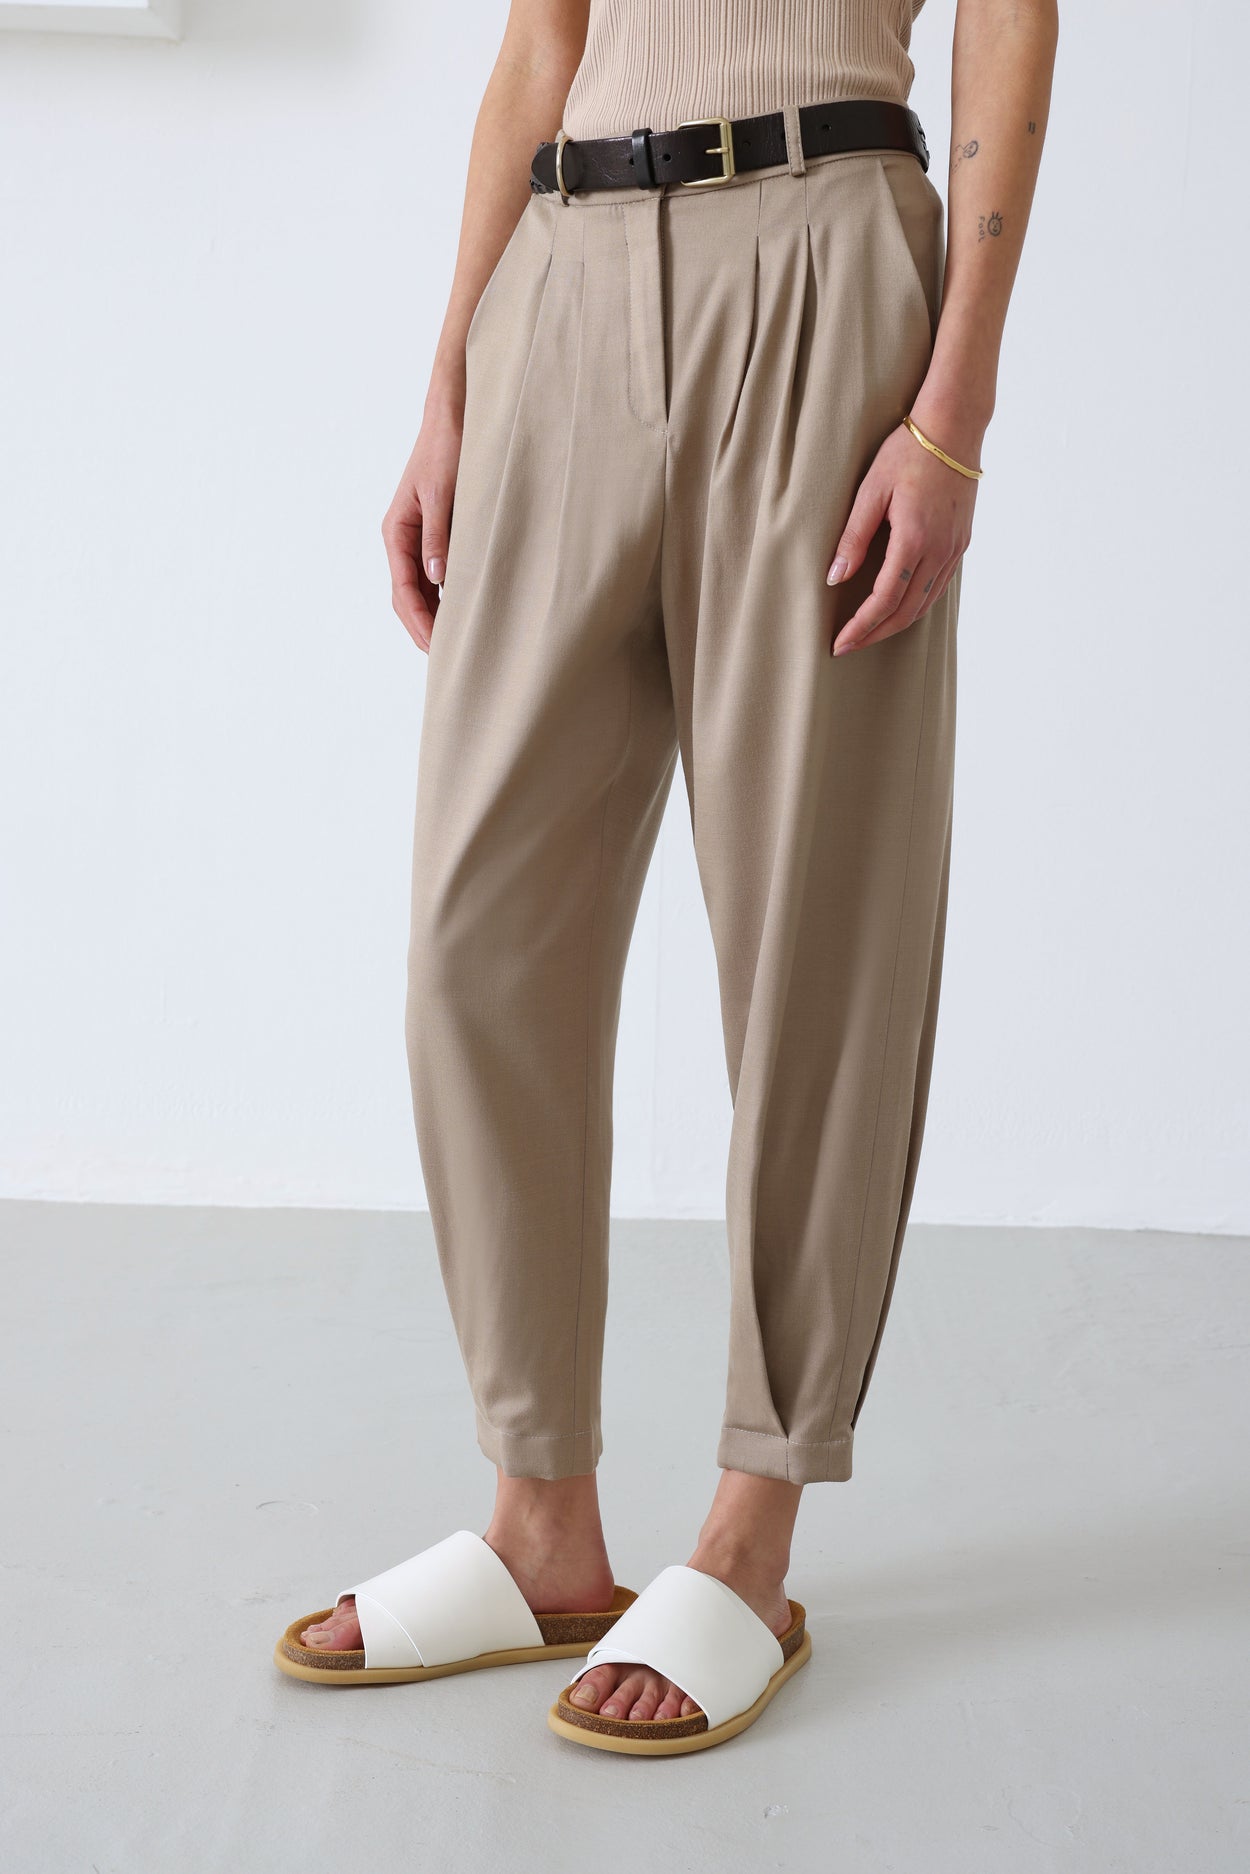 LOIS TAUPE TROUSER